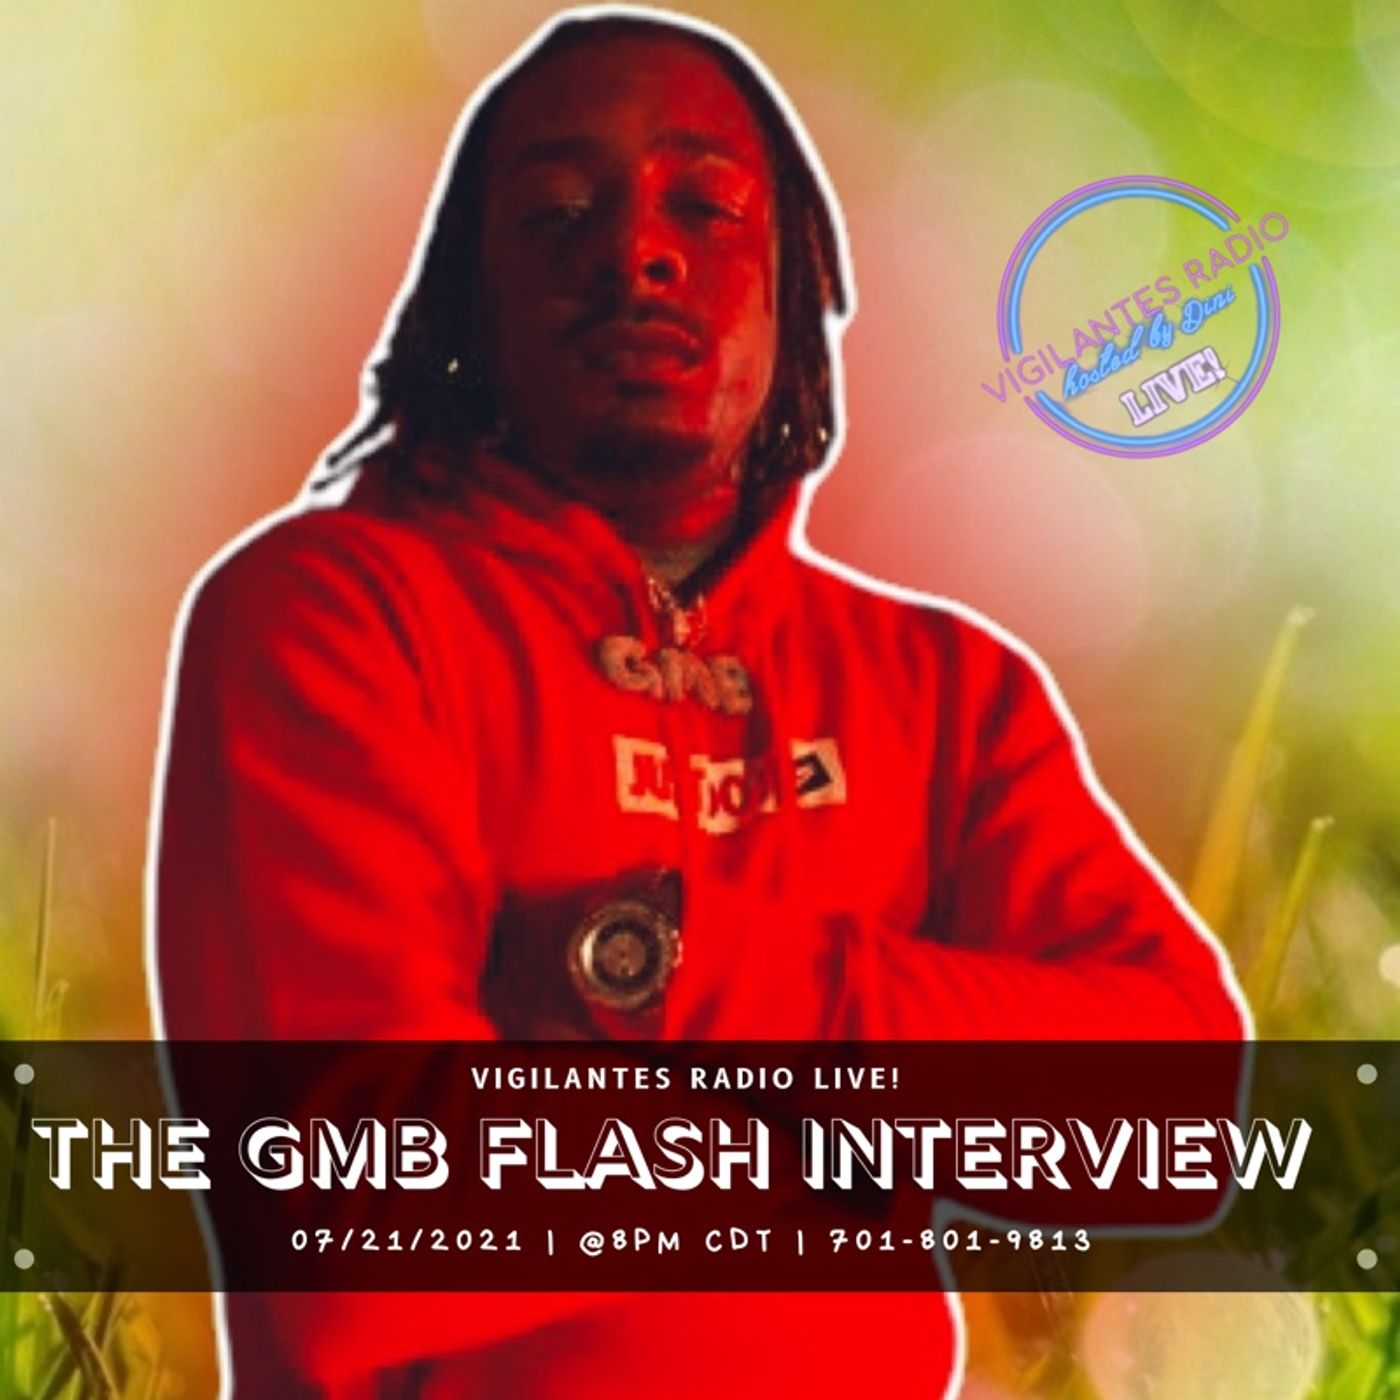 The GMB Flash Interview. Image